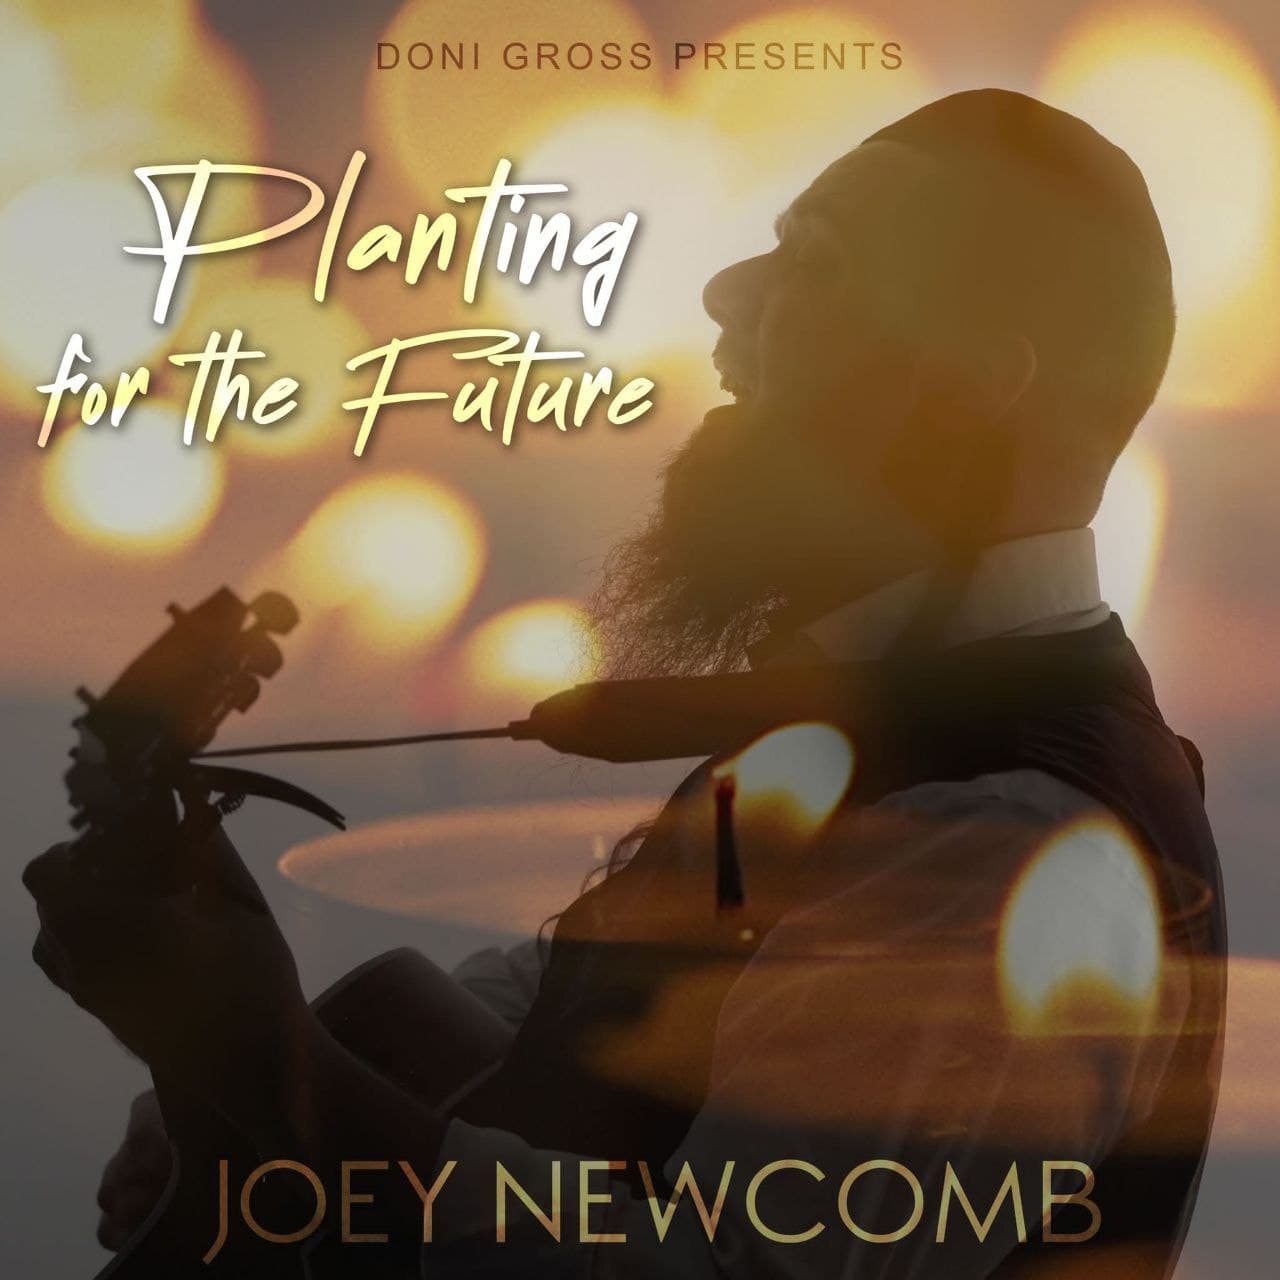 Joey Newcomb - Planting For the Future (Single)